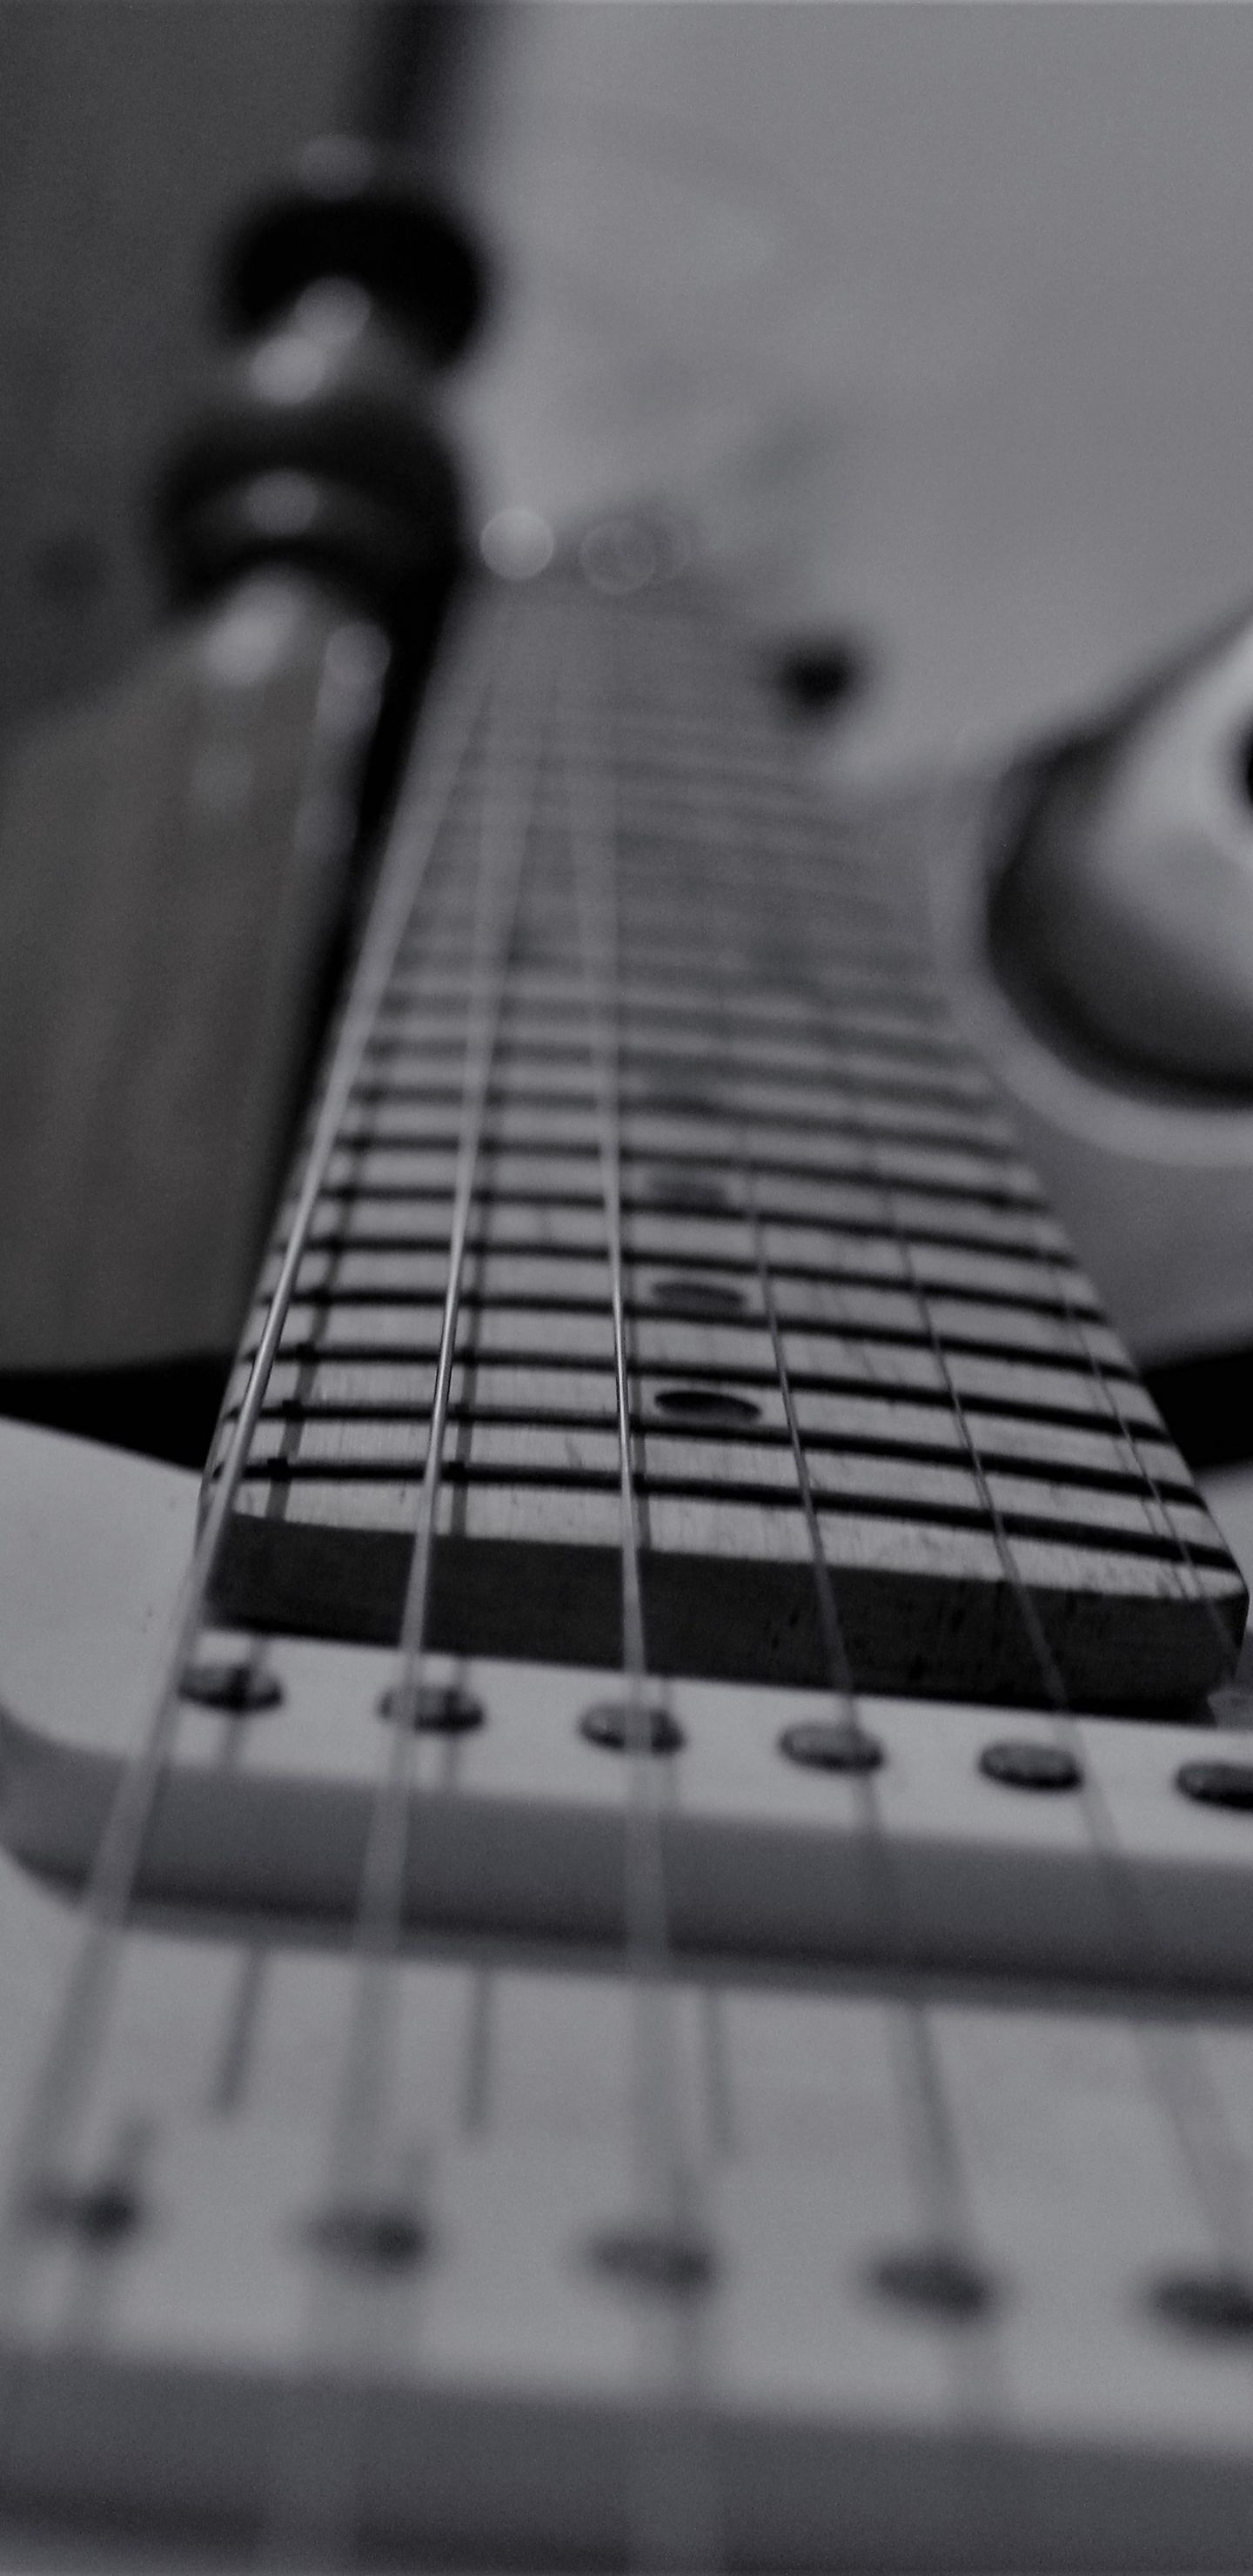 Bass Guitar, Black and White, Electric Guitar, Guitar, String Instrument. Wallpaper in 1440x2960 Resolution